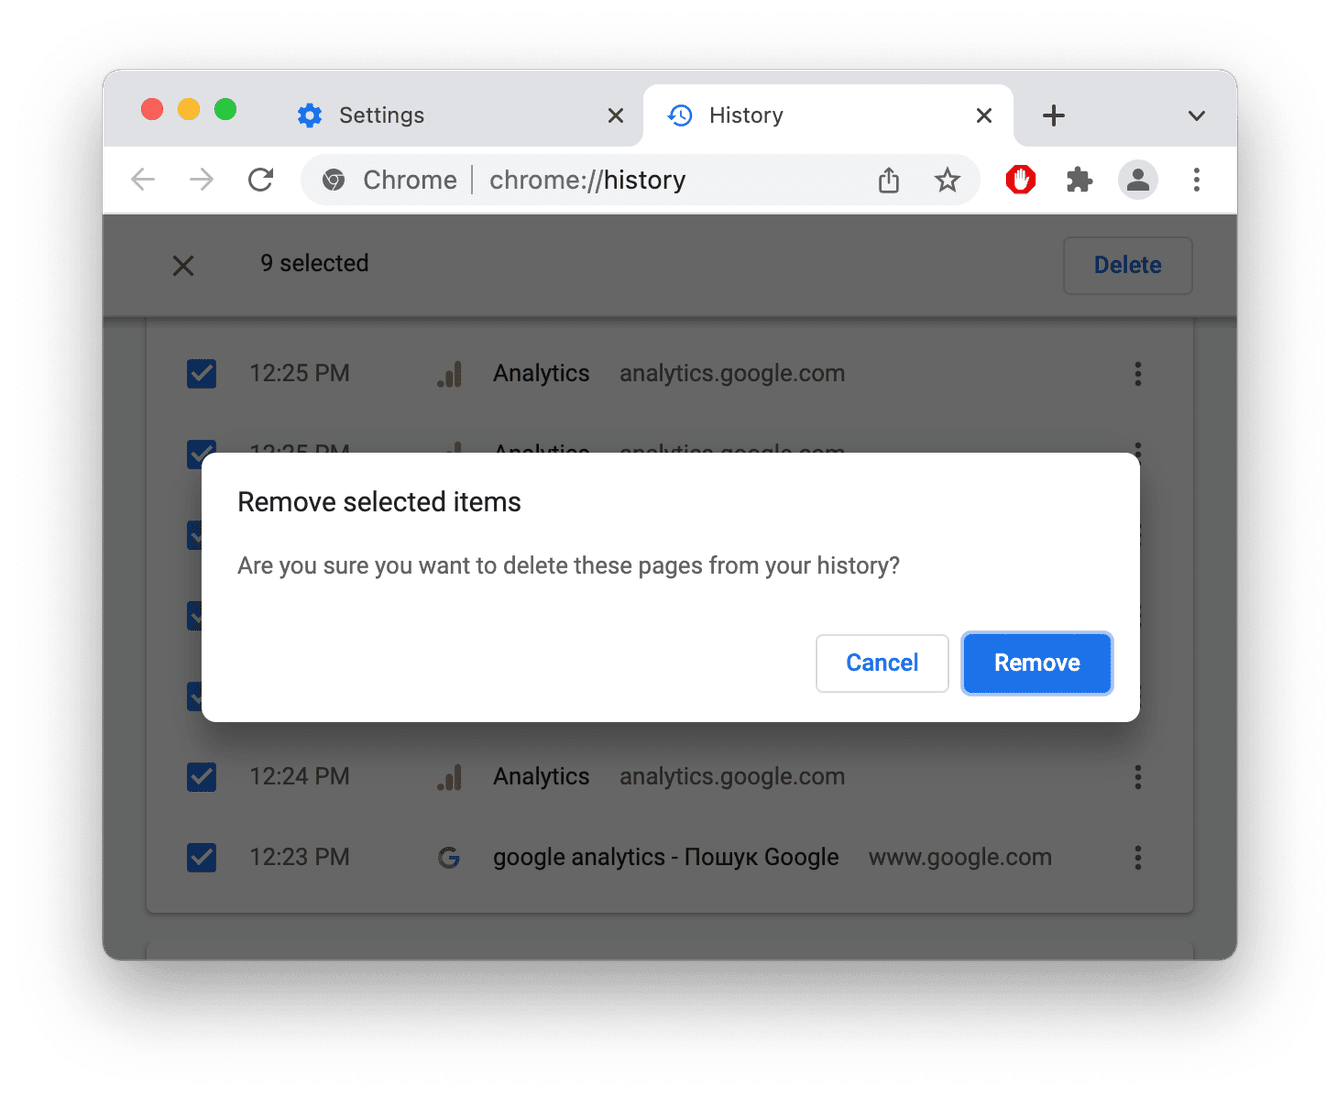 How to remove selected pages from Chrome history